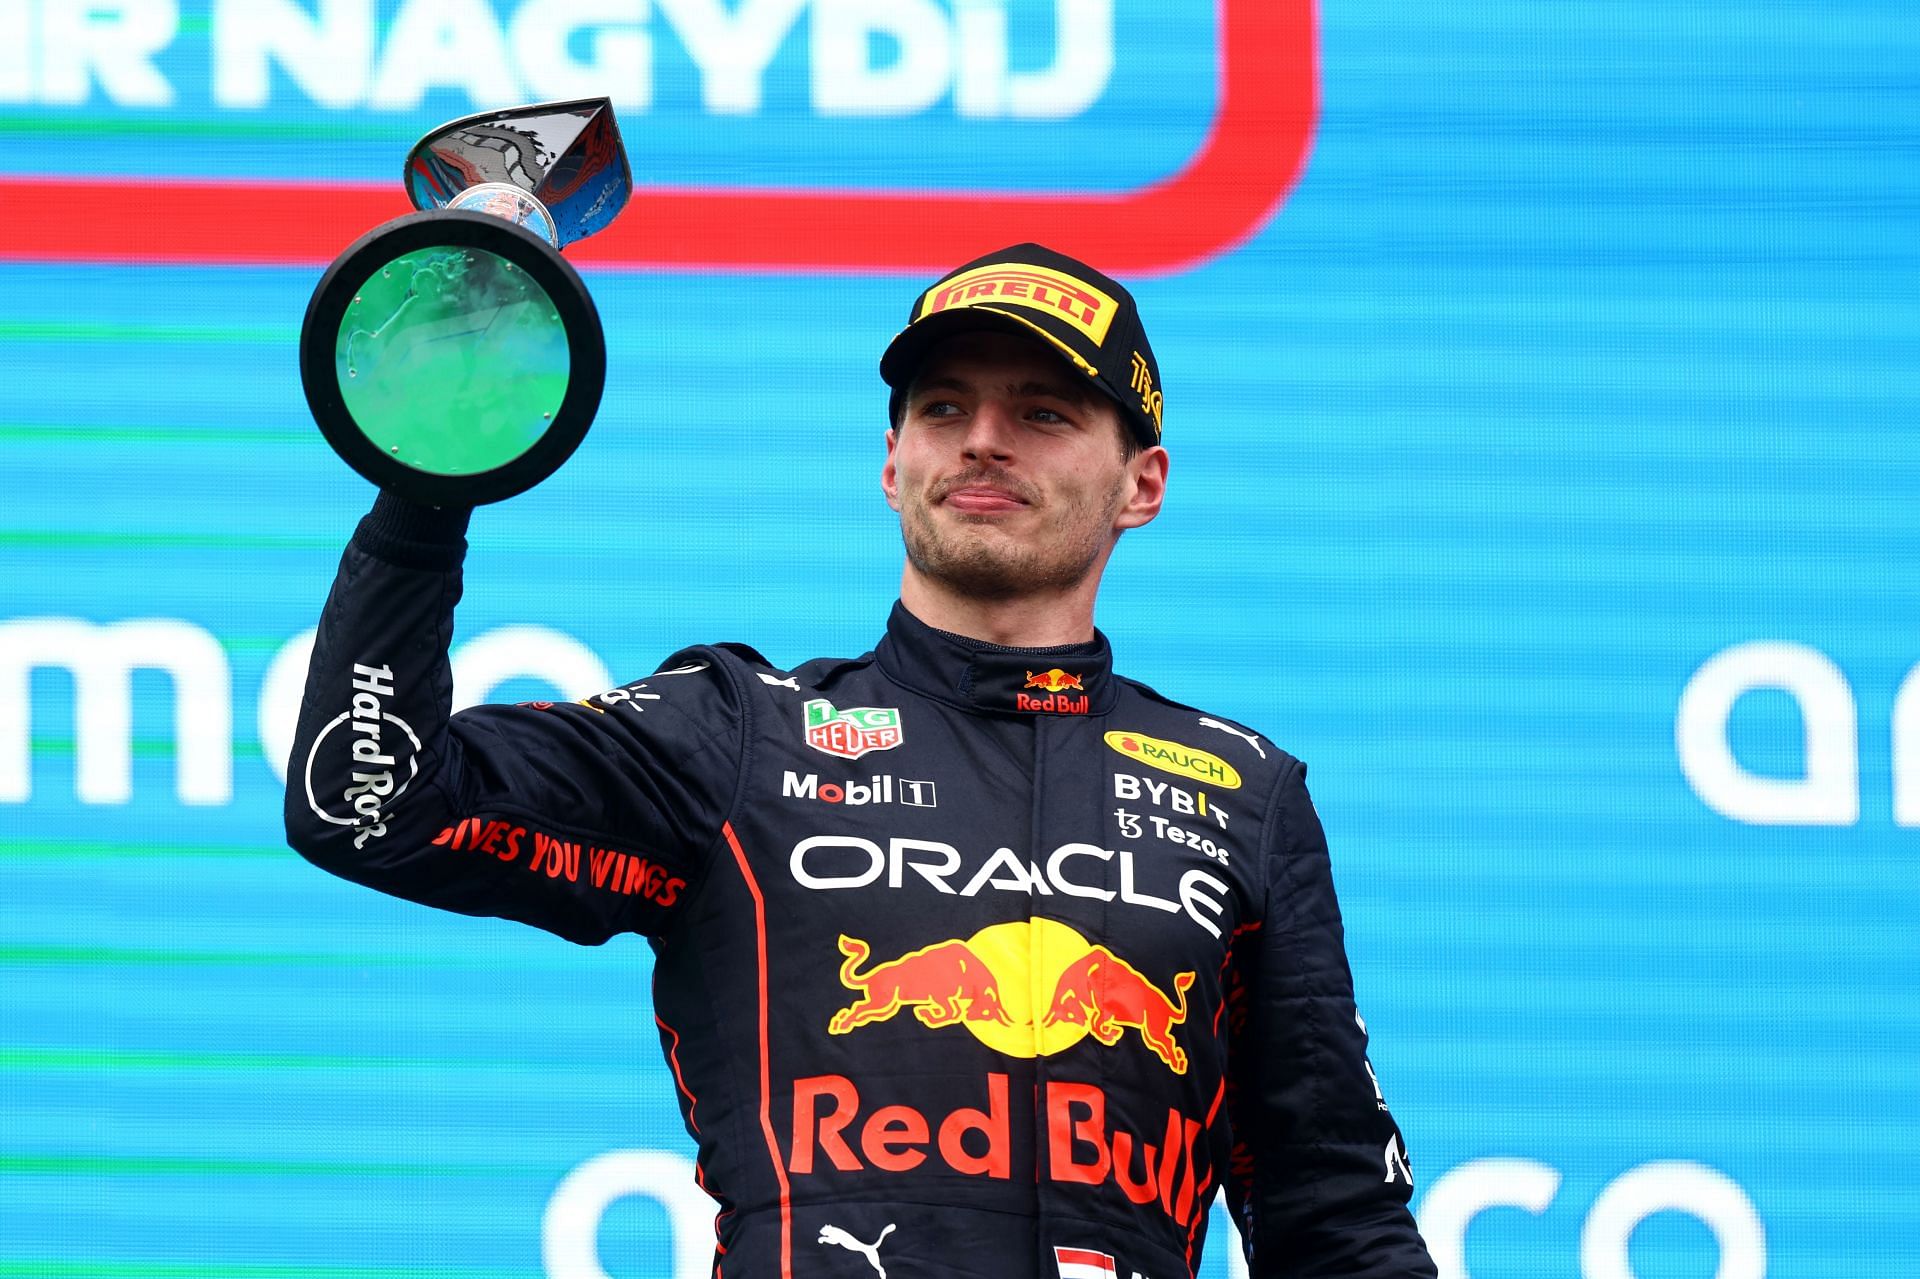 Race winner Max Verstappen celebrates on the podium during the F1 Grand Prix of Hungary at Hungaroring on July 31, 2022, in Budapest, Hungary. (Photo by Francois Nel/Getty Images)